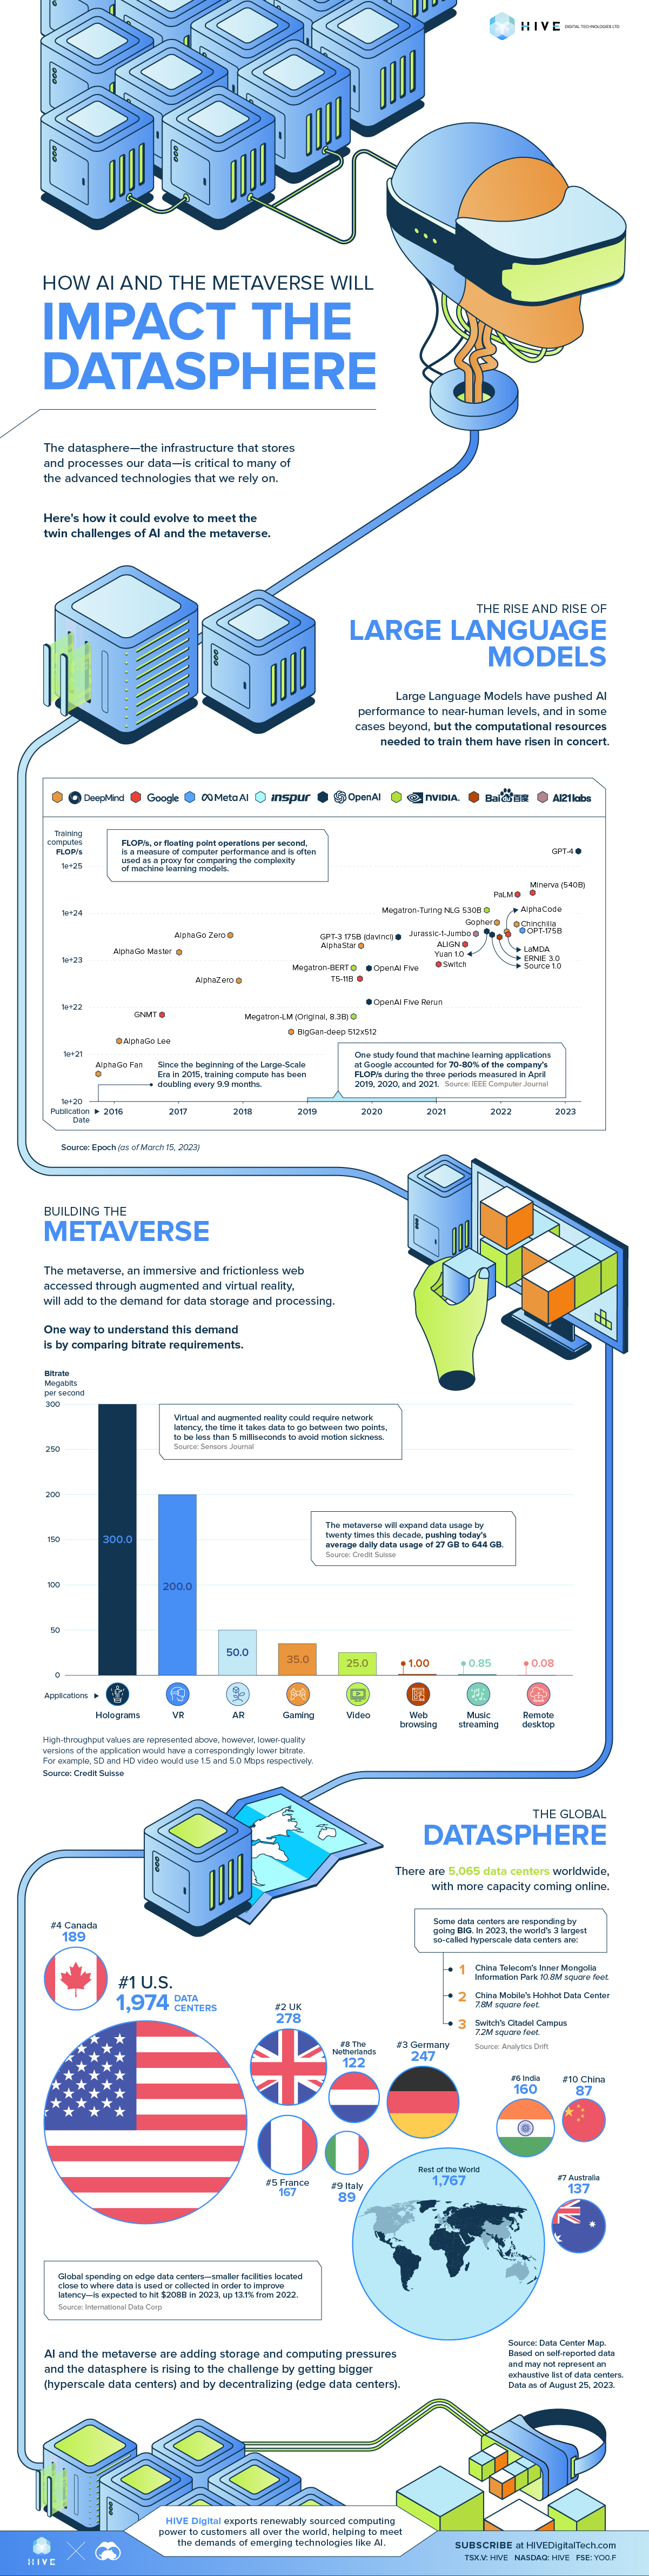 Infographic showing how AI, because of the ever-increasing demands of training compute, and the metaverse, with the large amount of data it will produce, will impact data centers, which are either getting ever larger, or decentralizing along the lines of Edge Computing.